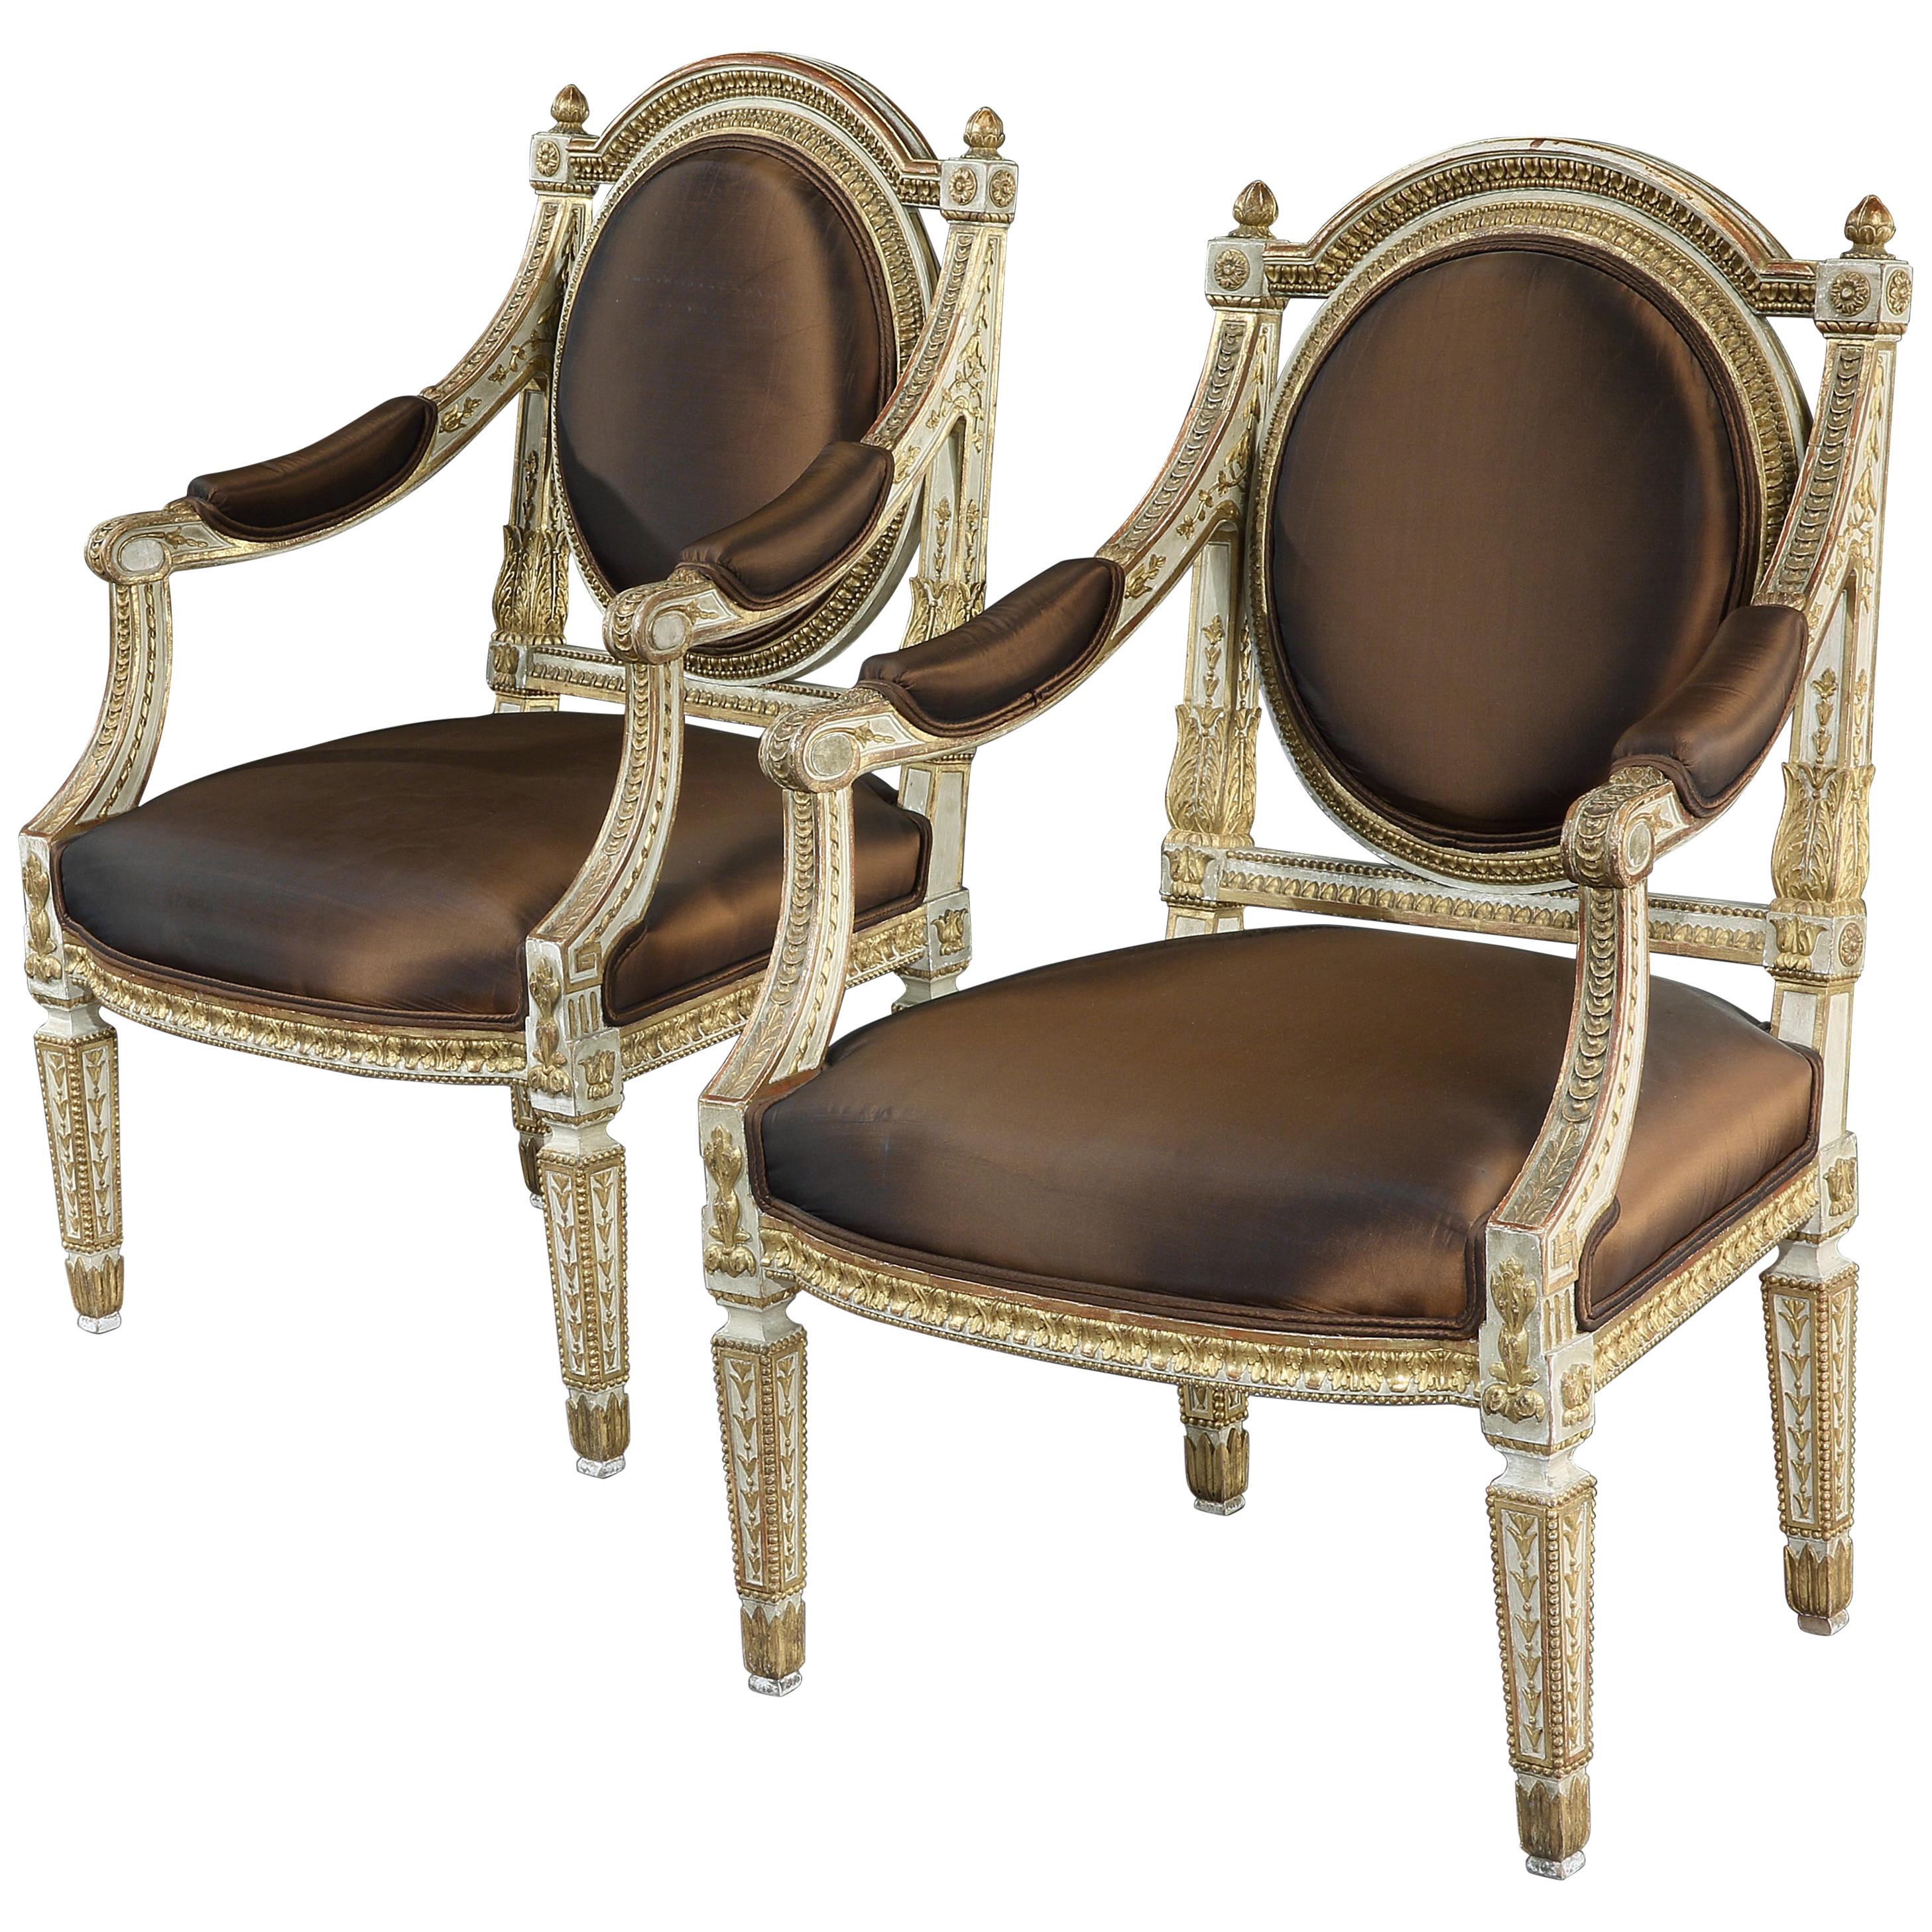 Fine and Decorative Pair of Italian Painted and Parcel Gilt Armchairs of